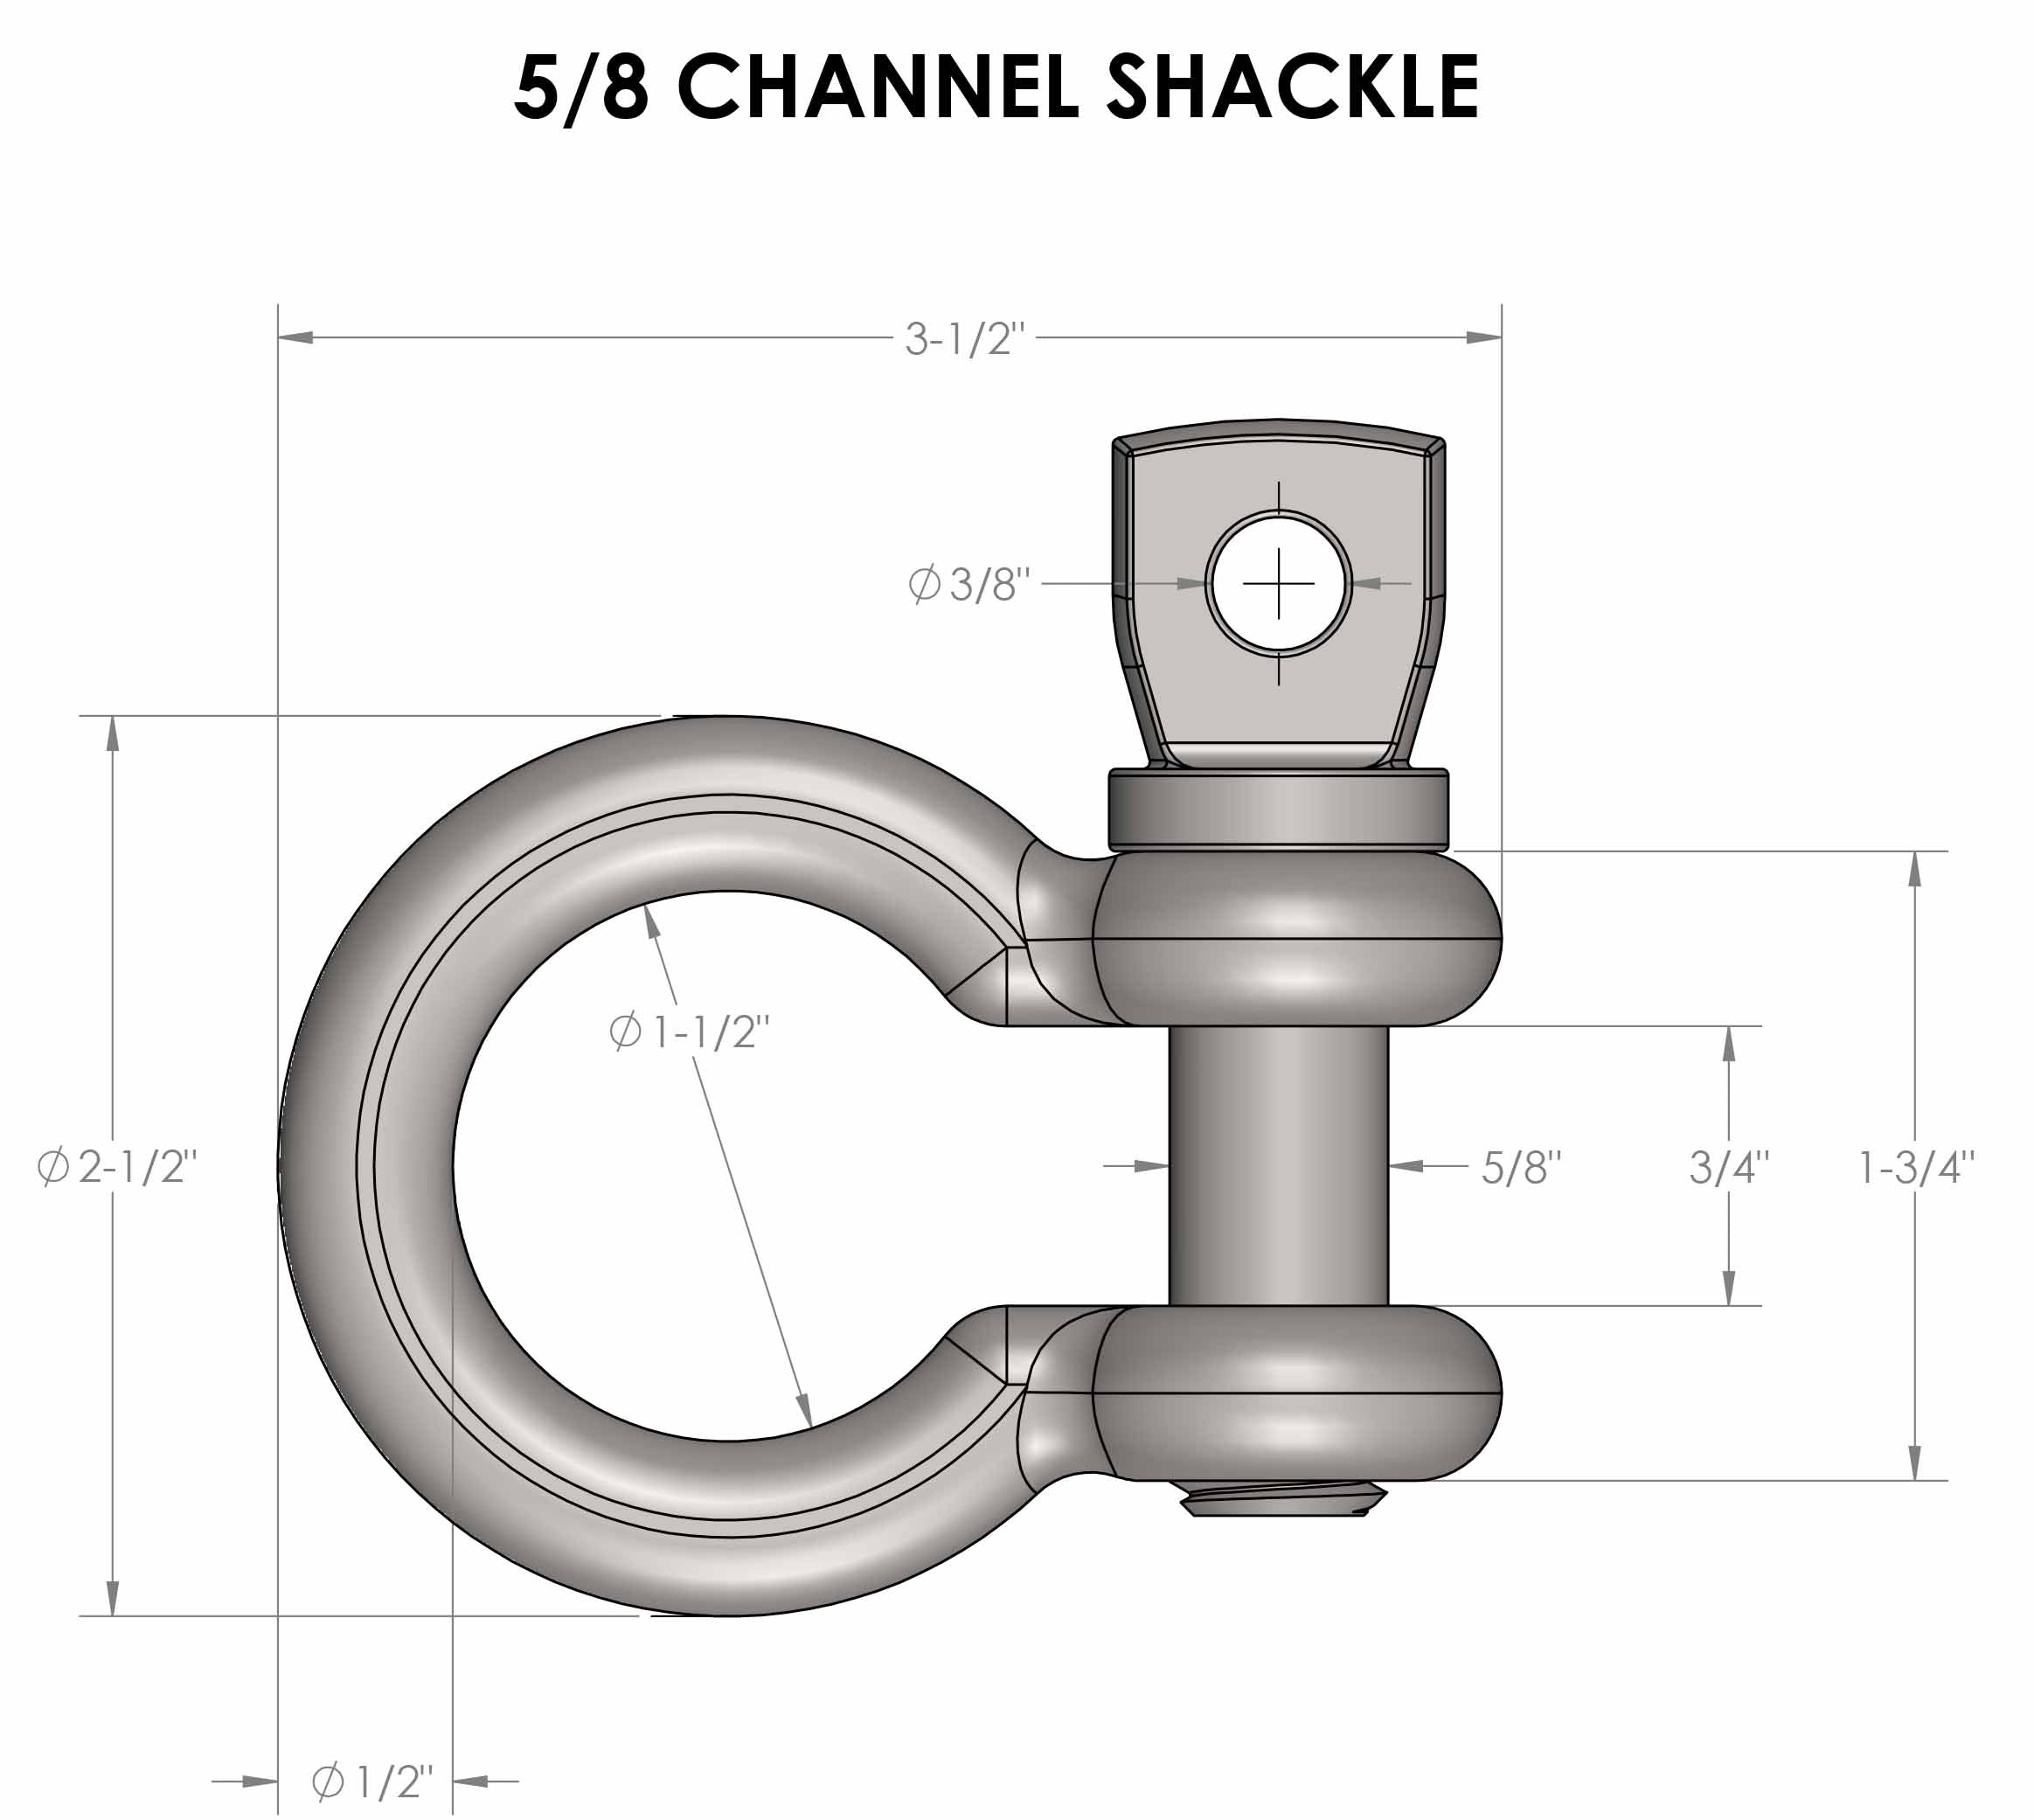 BulletProof 5/8" Channel Shackles for Safety Chains (Pair) Design Specification